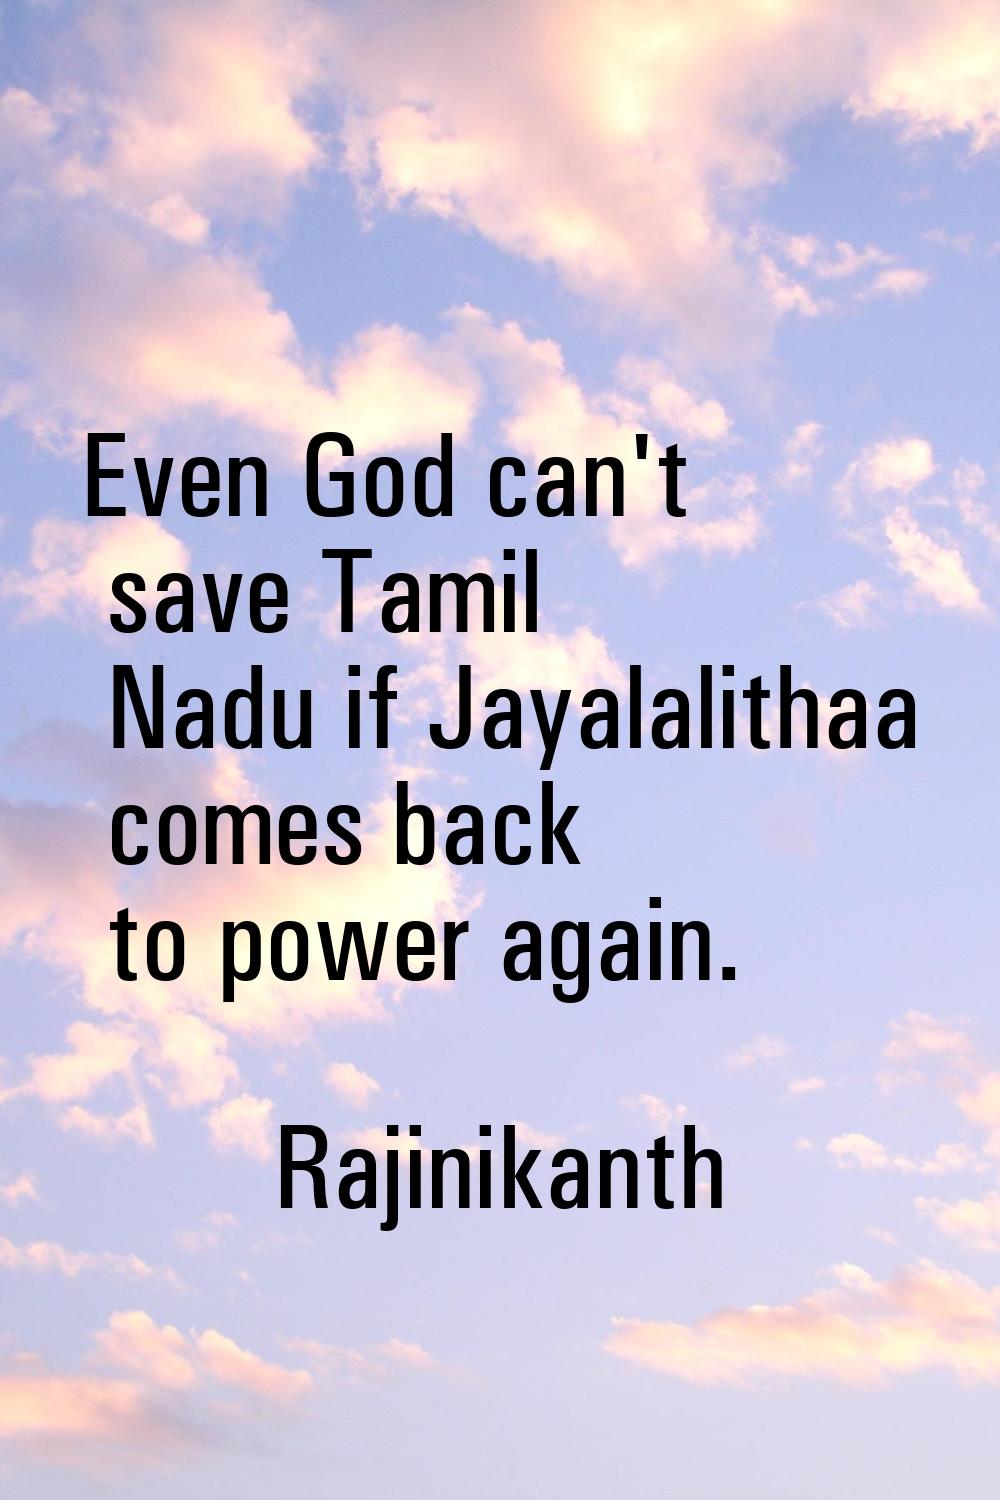 Even God can't save Tamil Nadu if Jayalalithaa comes back to power again.